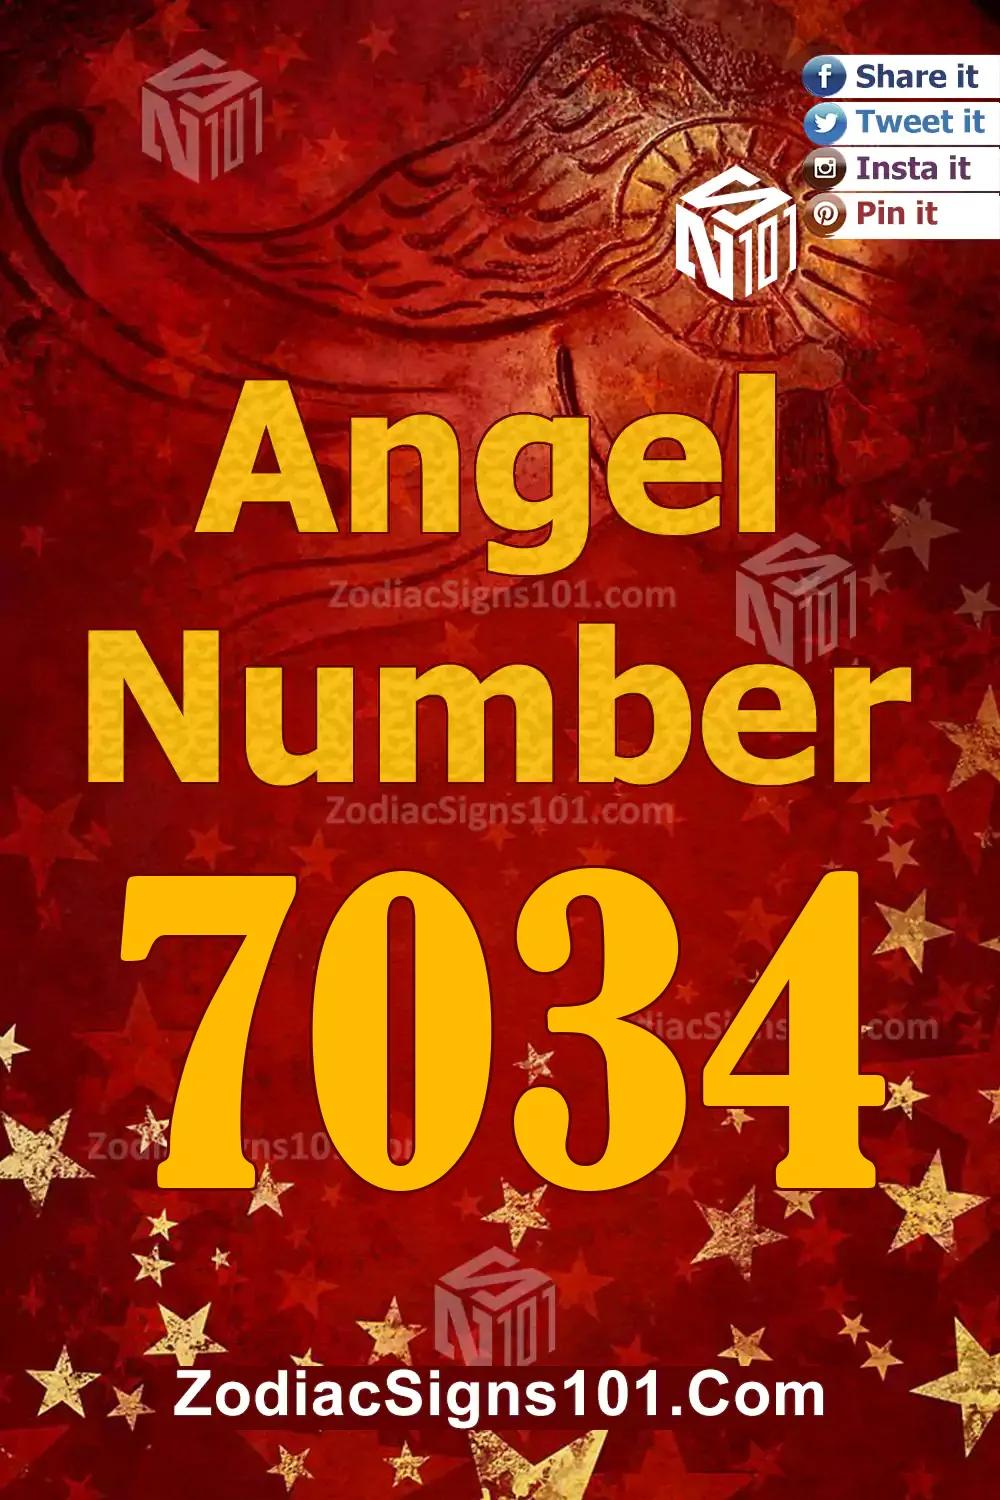 7034 Angel Number Meaning